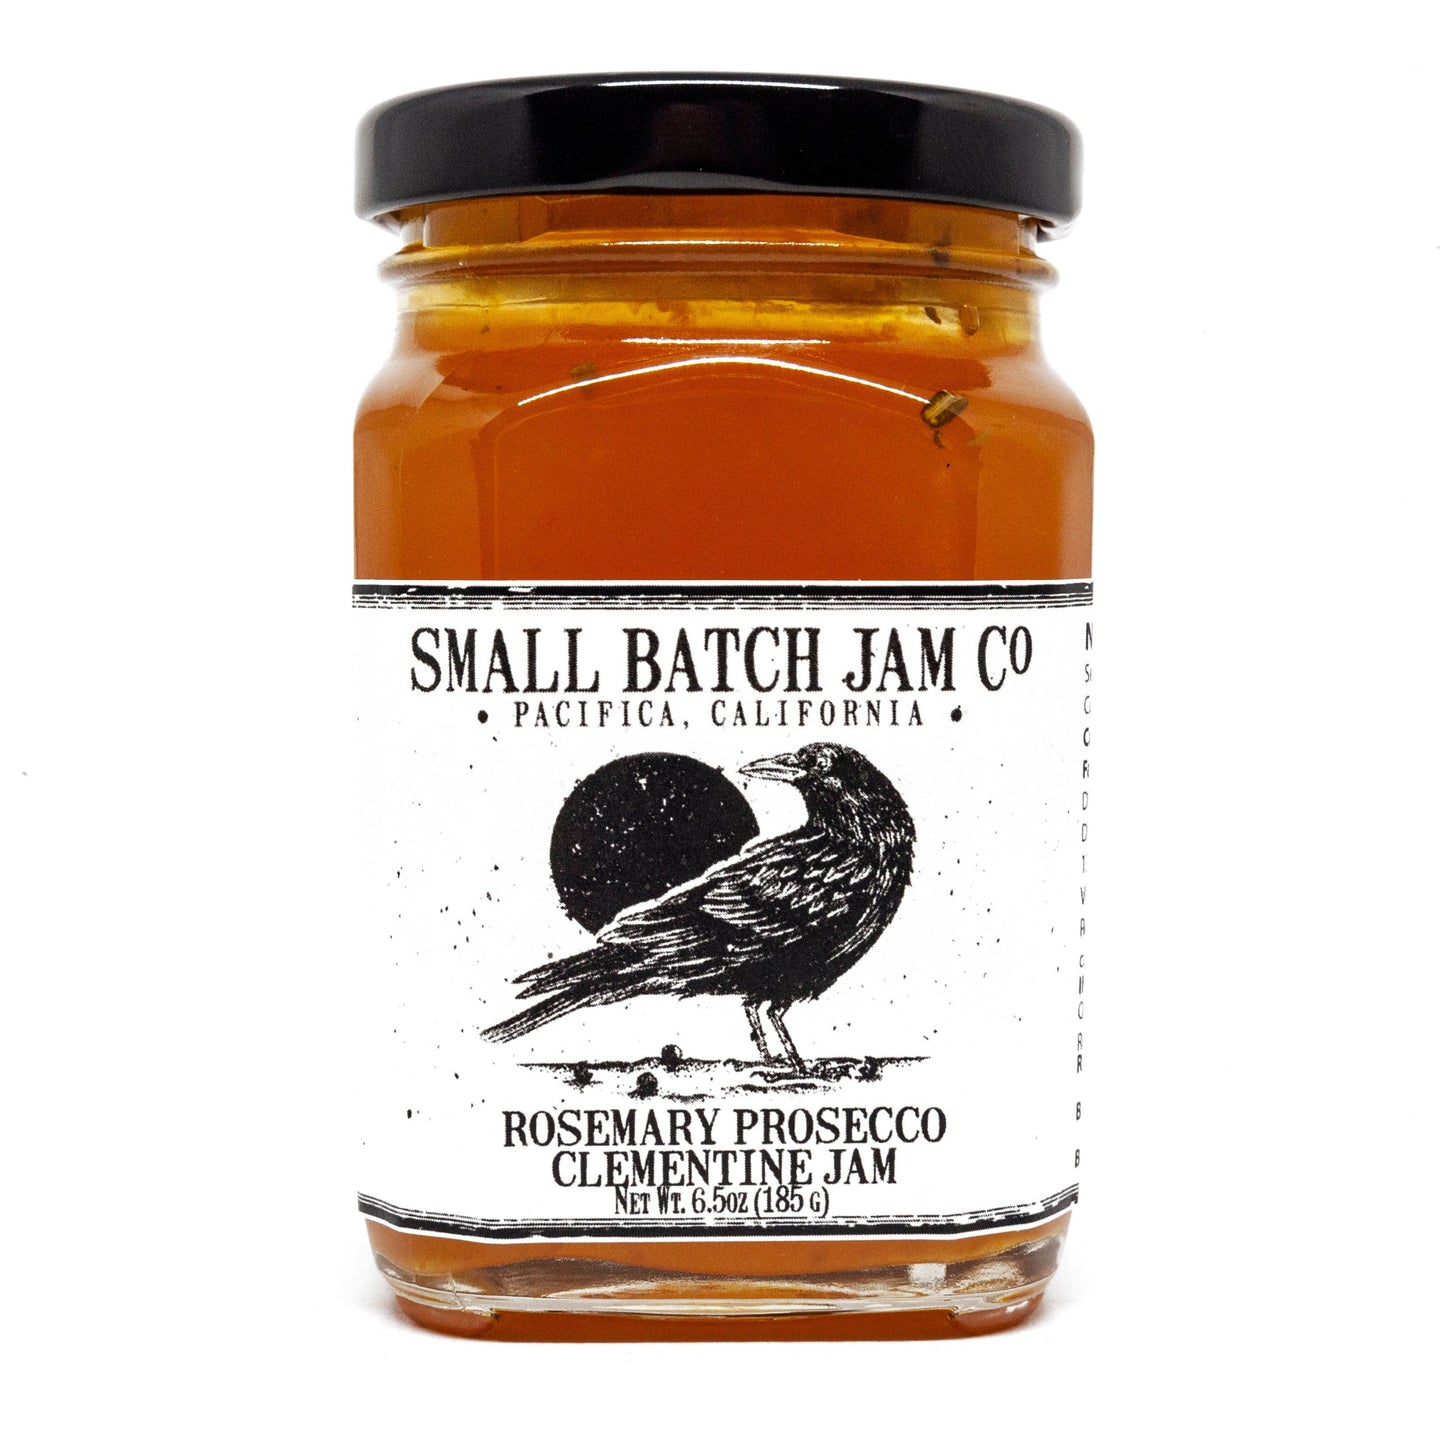 Small Batch Jam Co. Rosemary Prosecco Clementine Jam